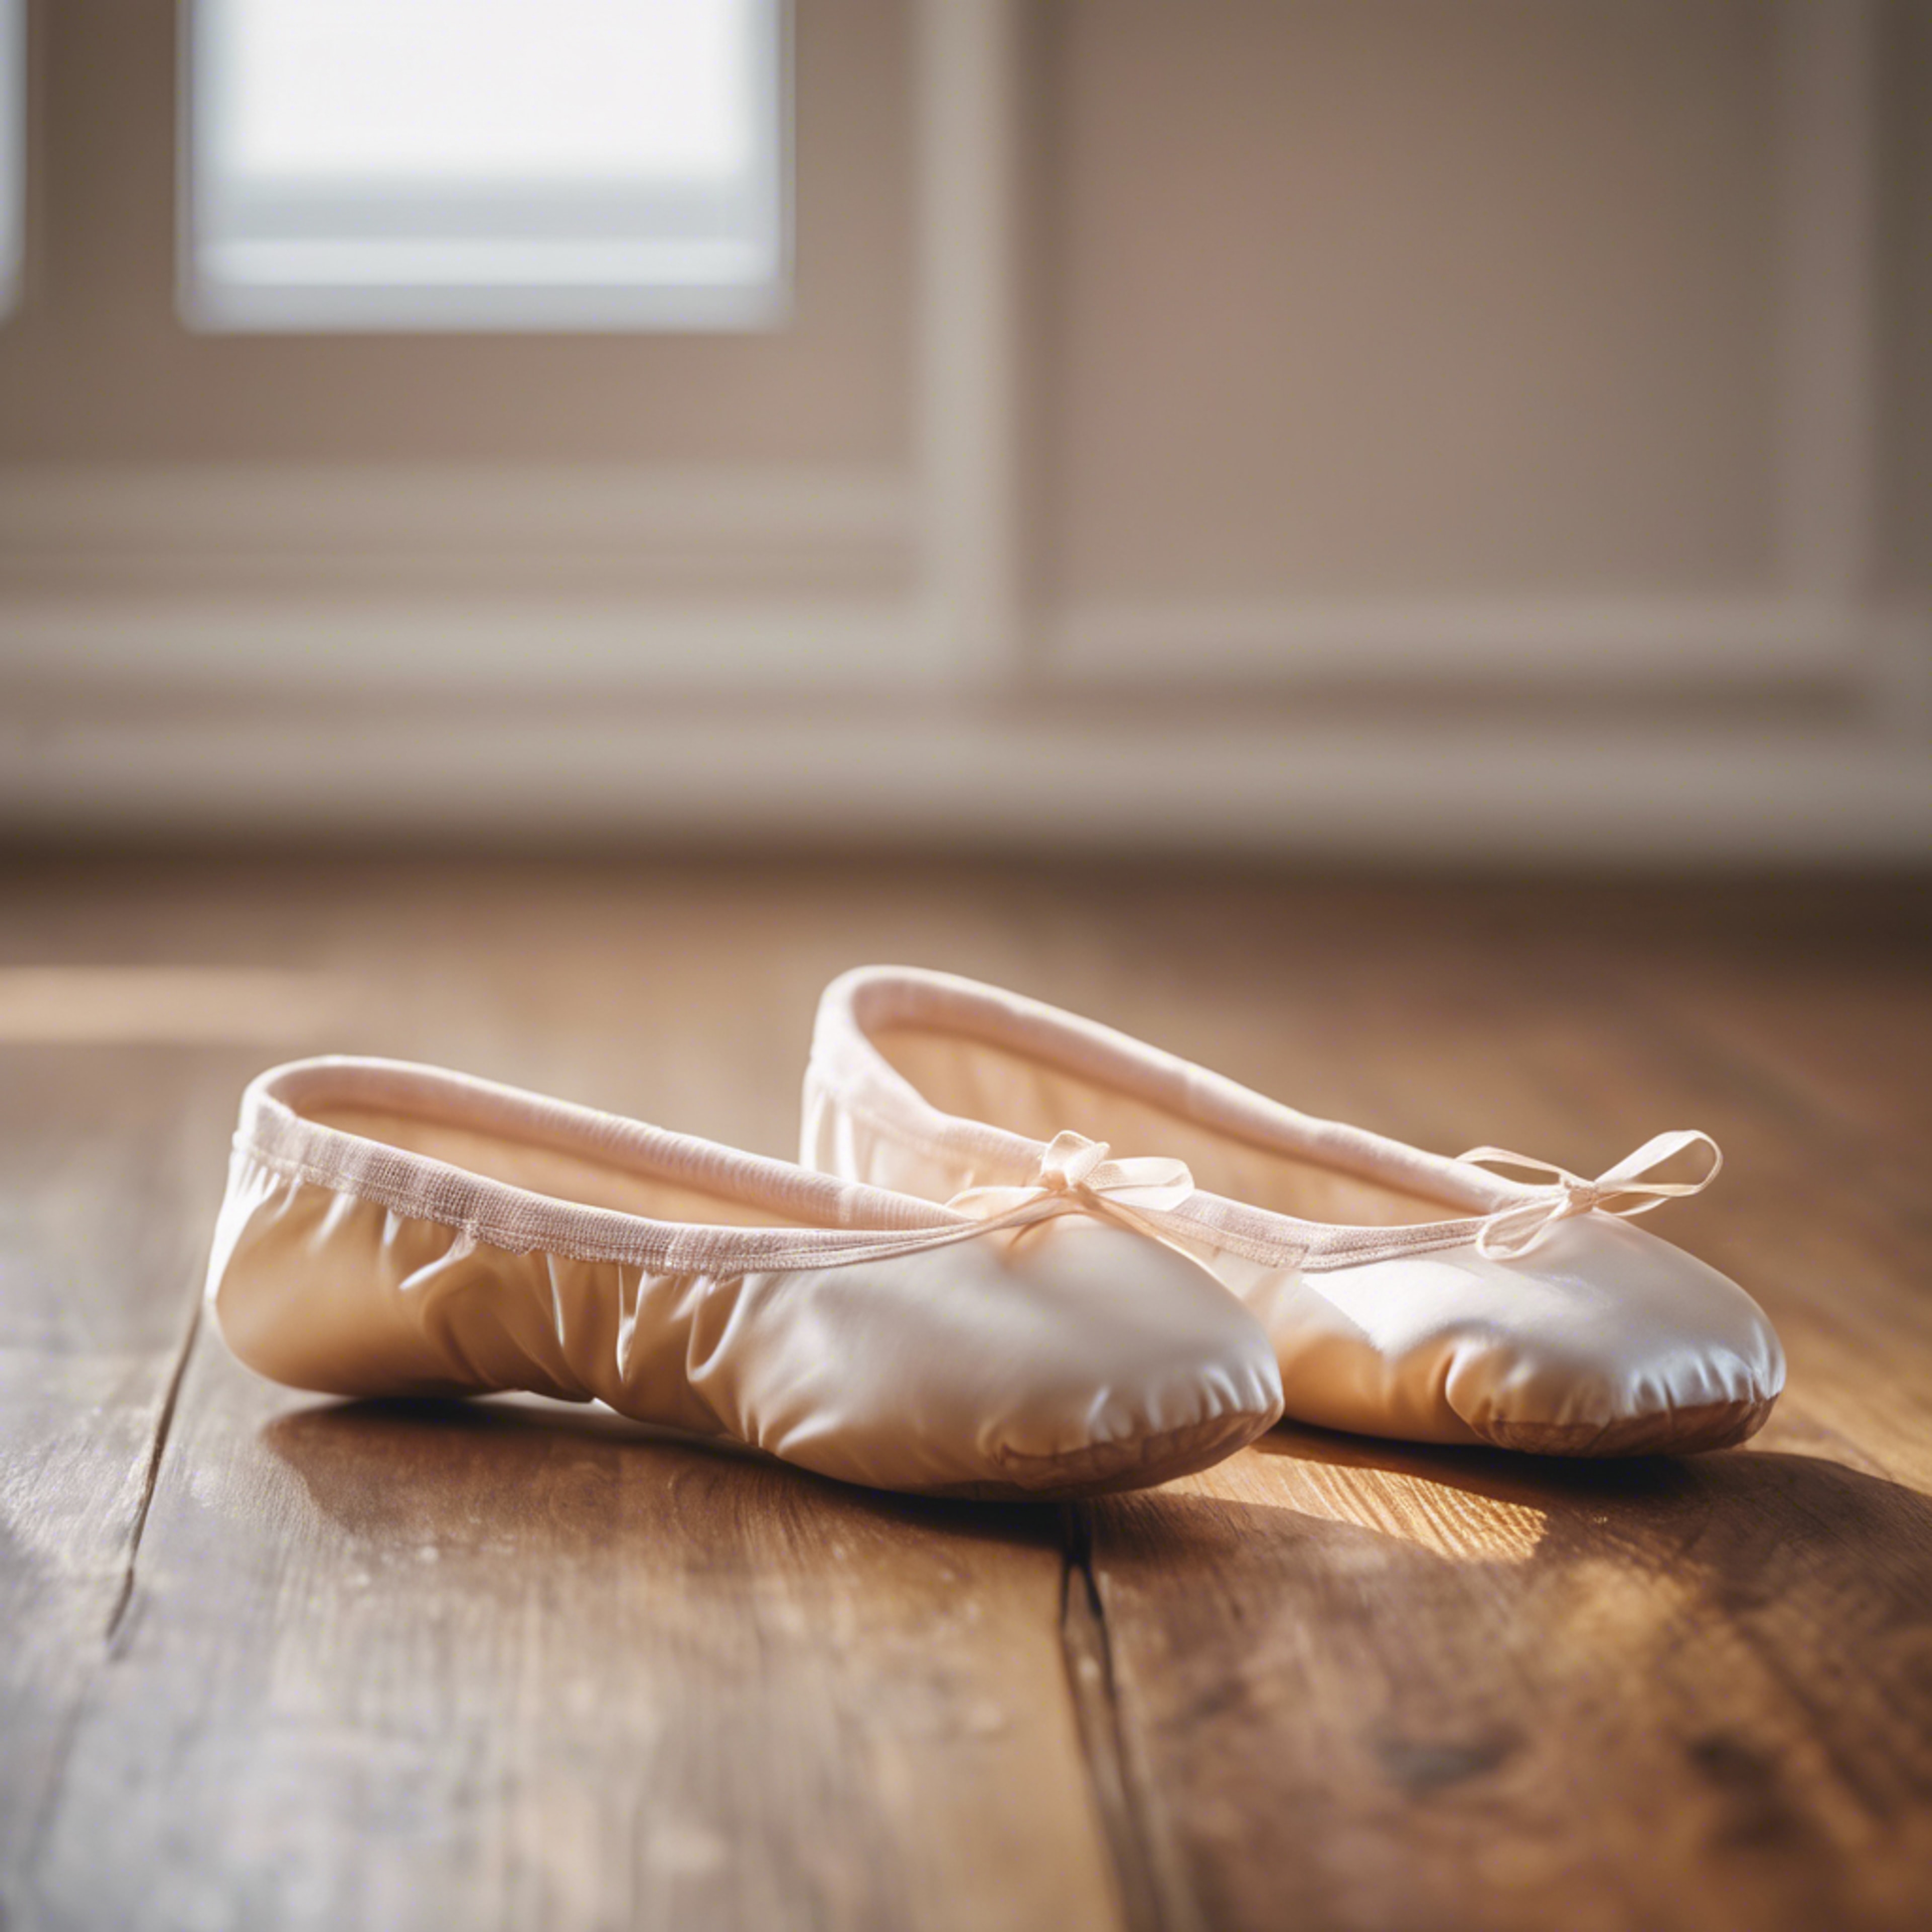 Close up of a pair of cream-colored ballet slippers on a hardwood floor. 墙纸[4efd7208256149a9b923]